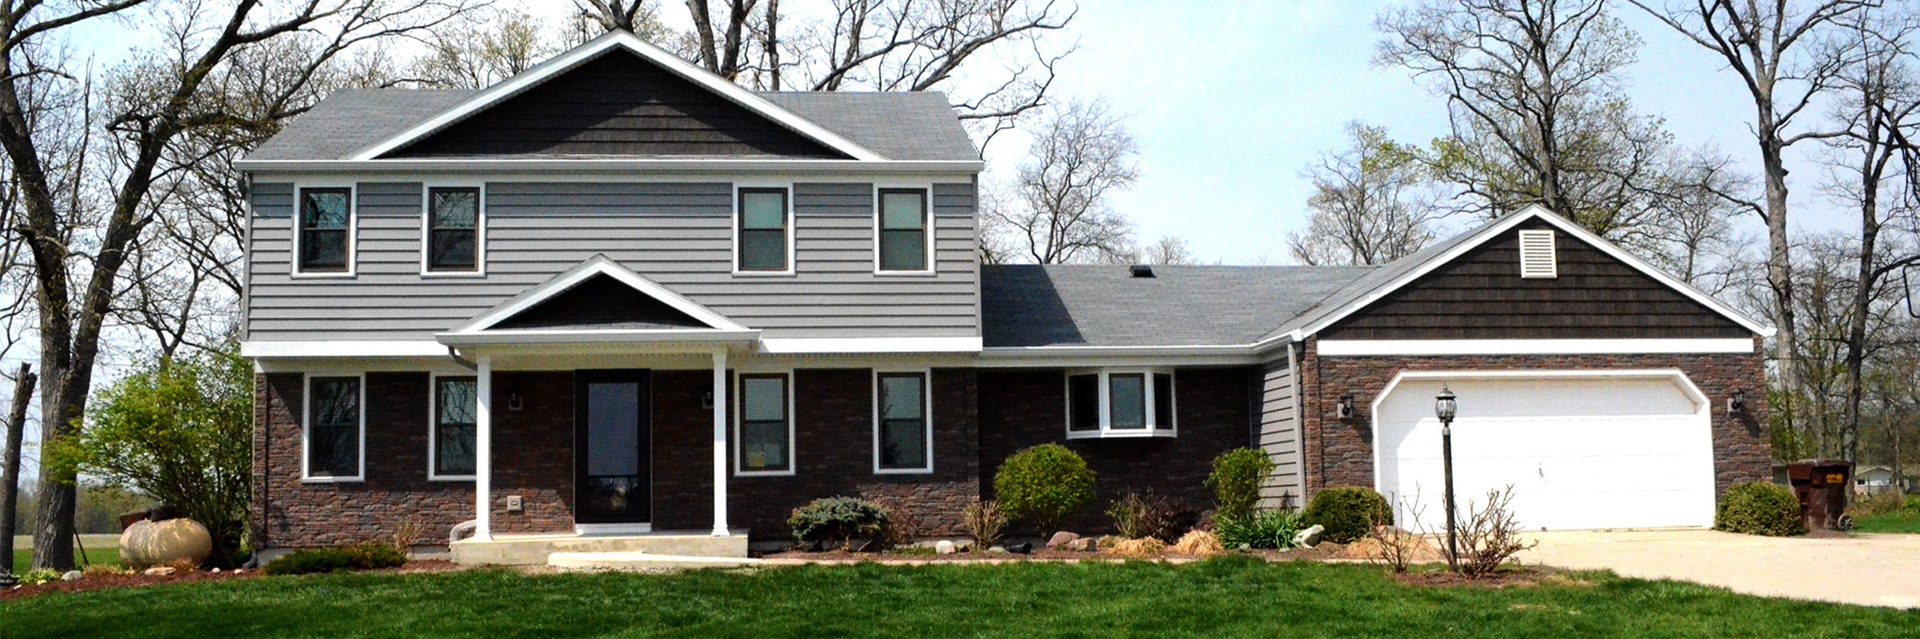 Before After Siding Installation Projects Key Exteriors Inc